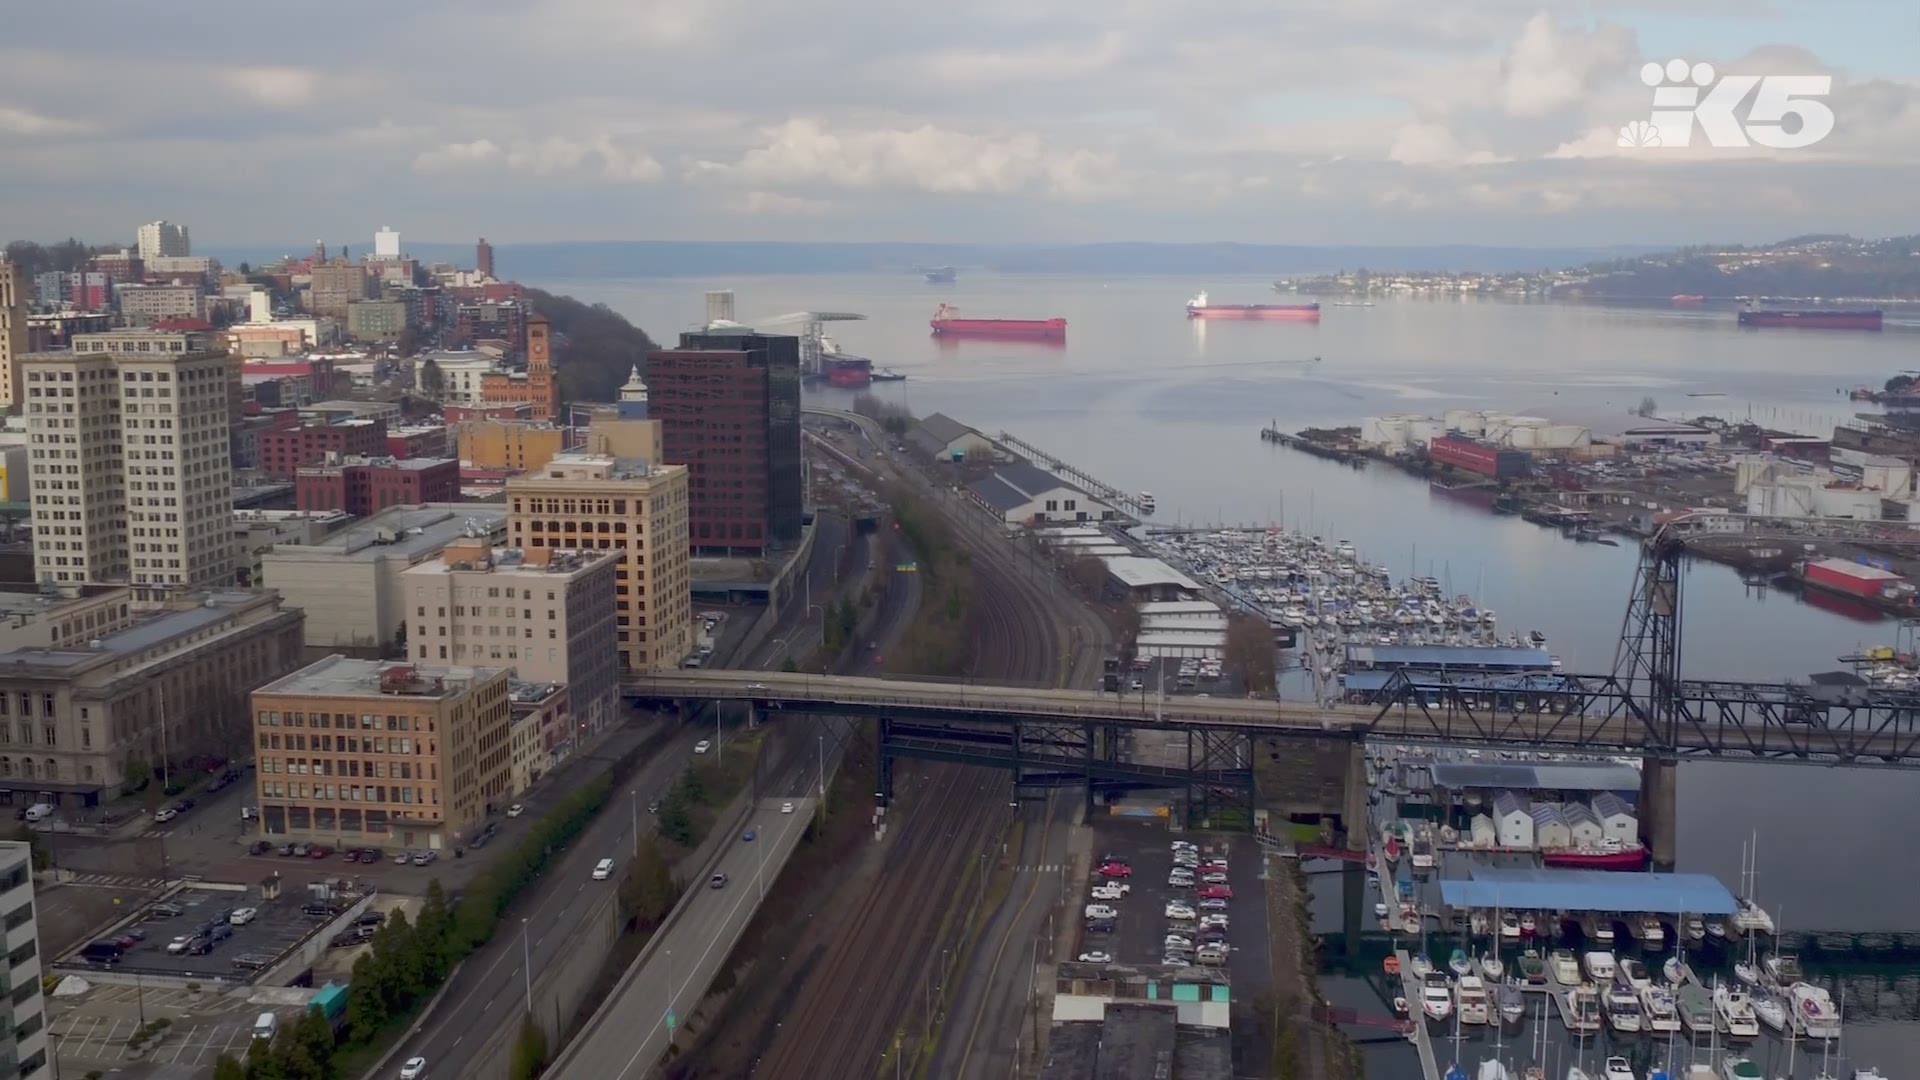 Take in a birds-eye view of Tacoma from the KING 5 drone Dexter.